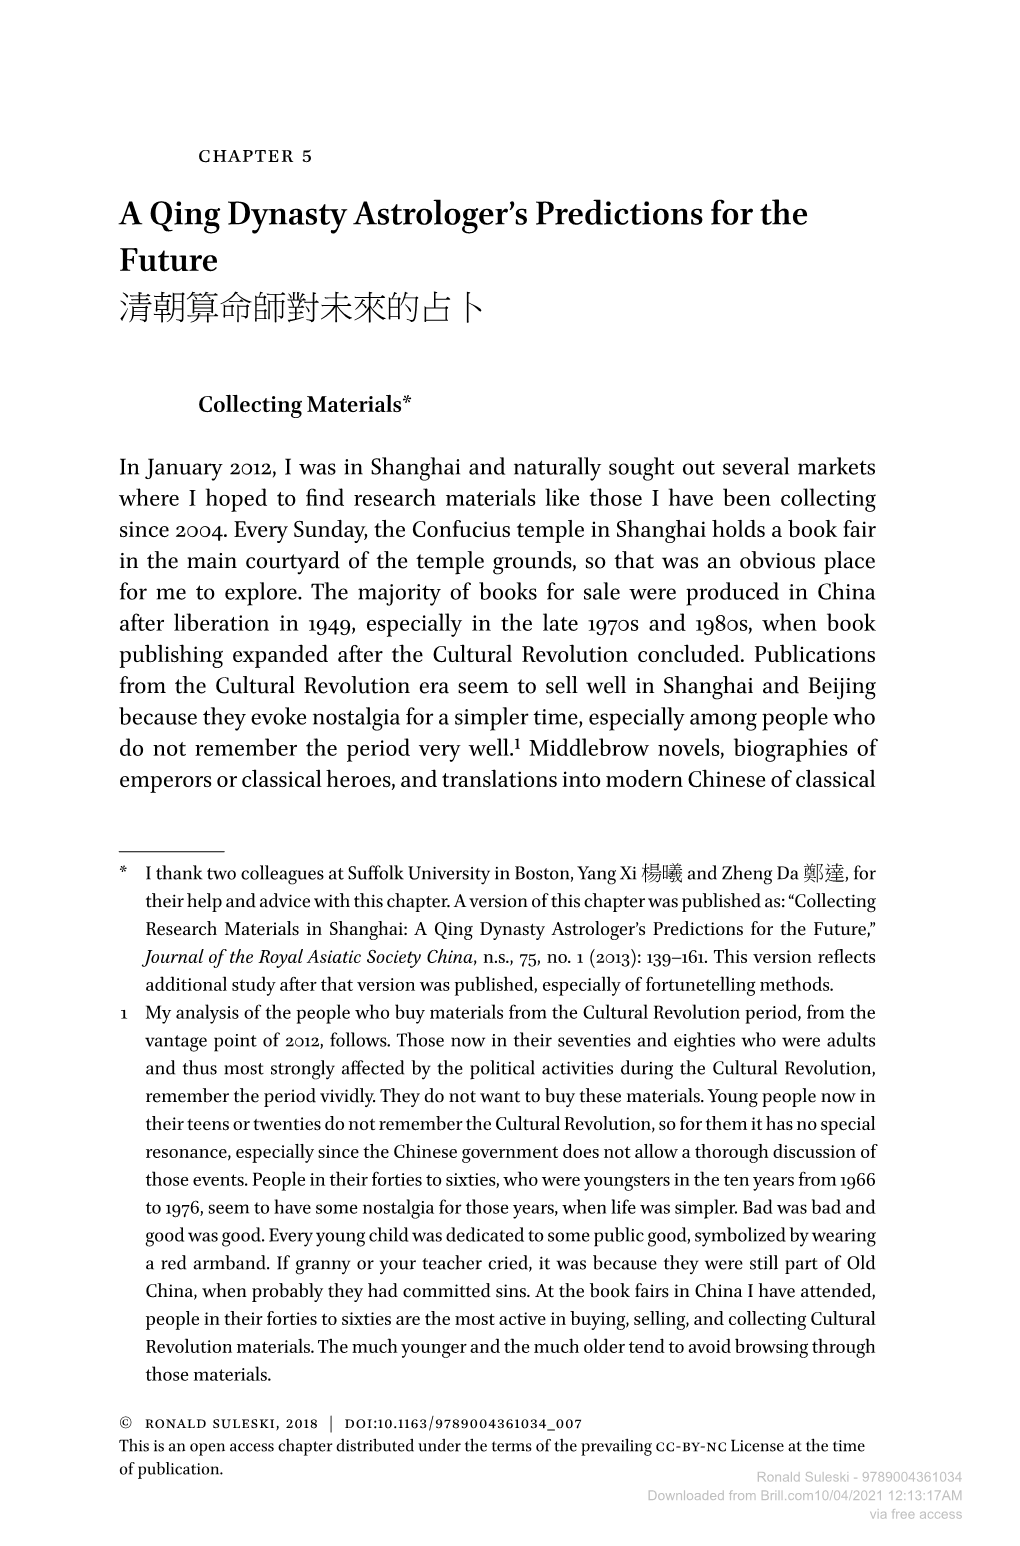 A Qing Dynasty Astrologer's Predictions for the Future